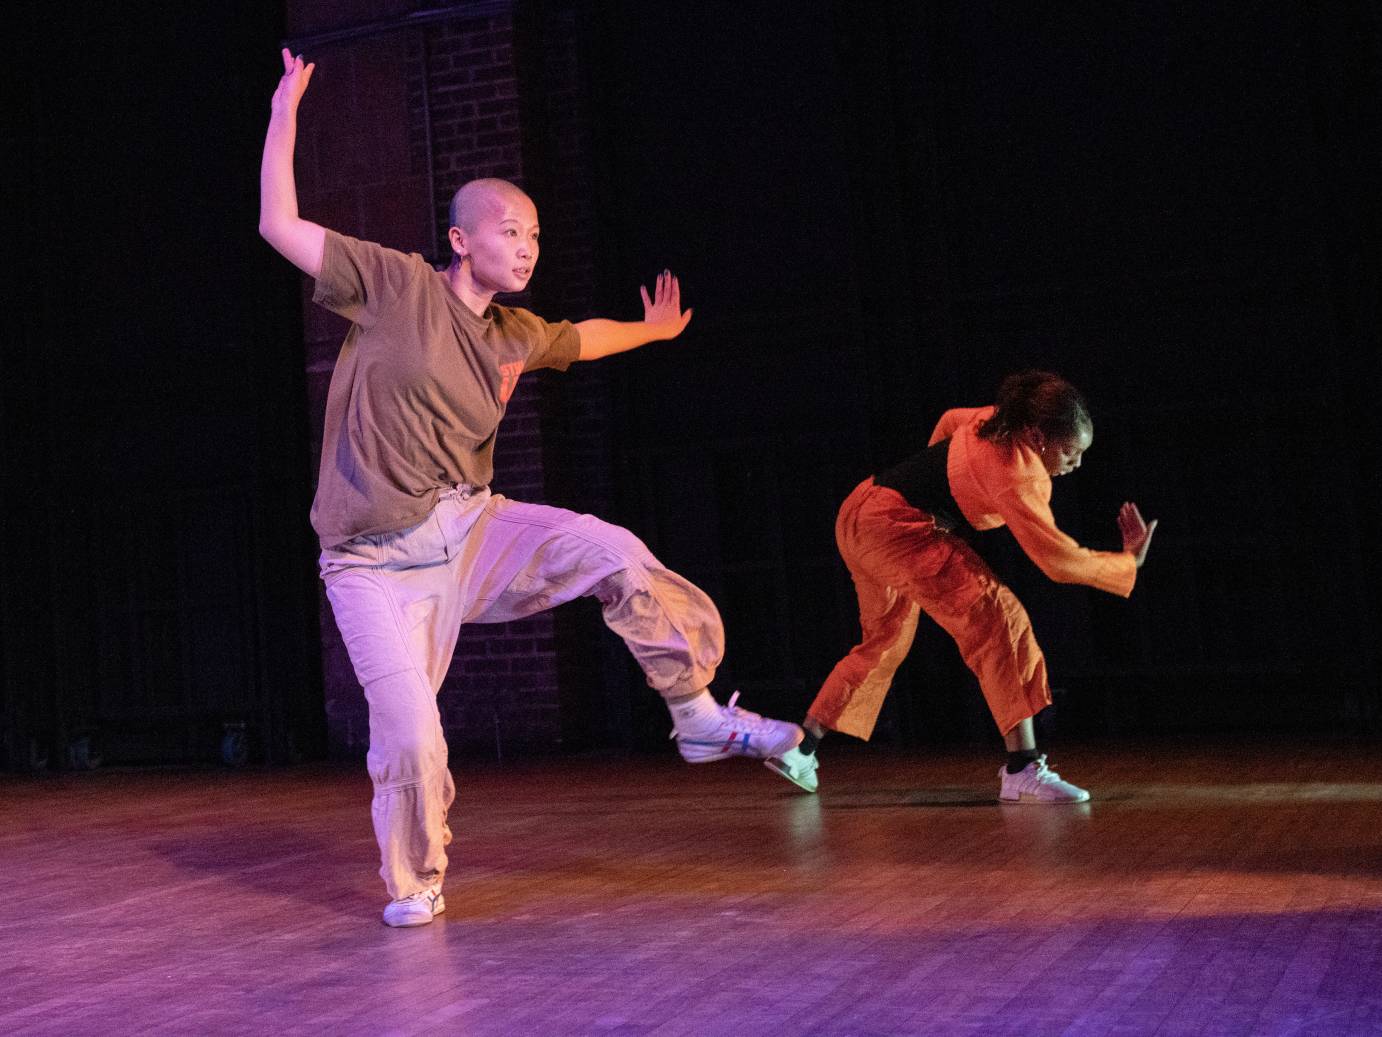 a bald Asian woman in loss fitting khaki pants and a brown t-shirt balances on one leg, while her partner a young Black woman dress in mostly bright orange bends forward..